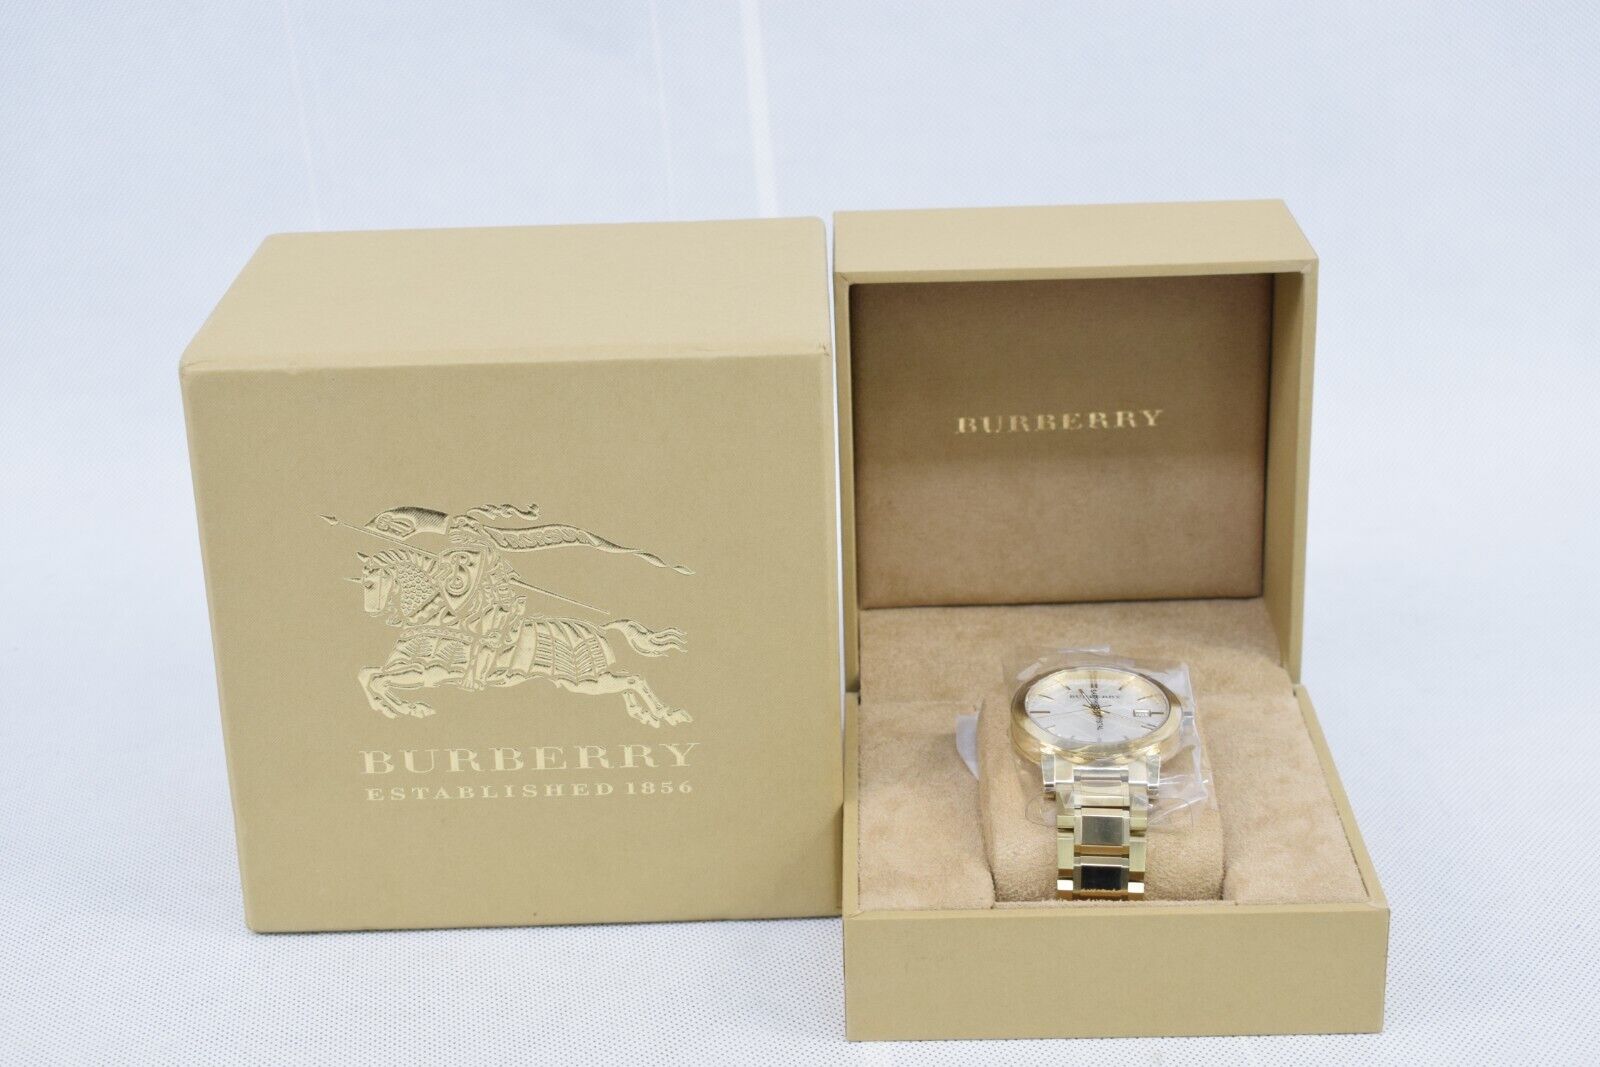 Burberry Men's The City Gold Coloured Wristwatch Model BU9003 With Box